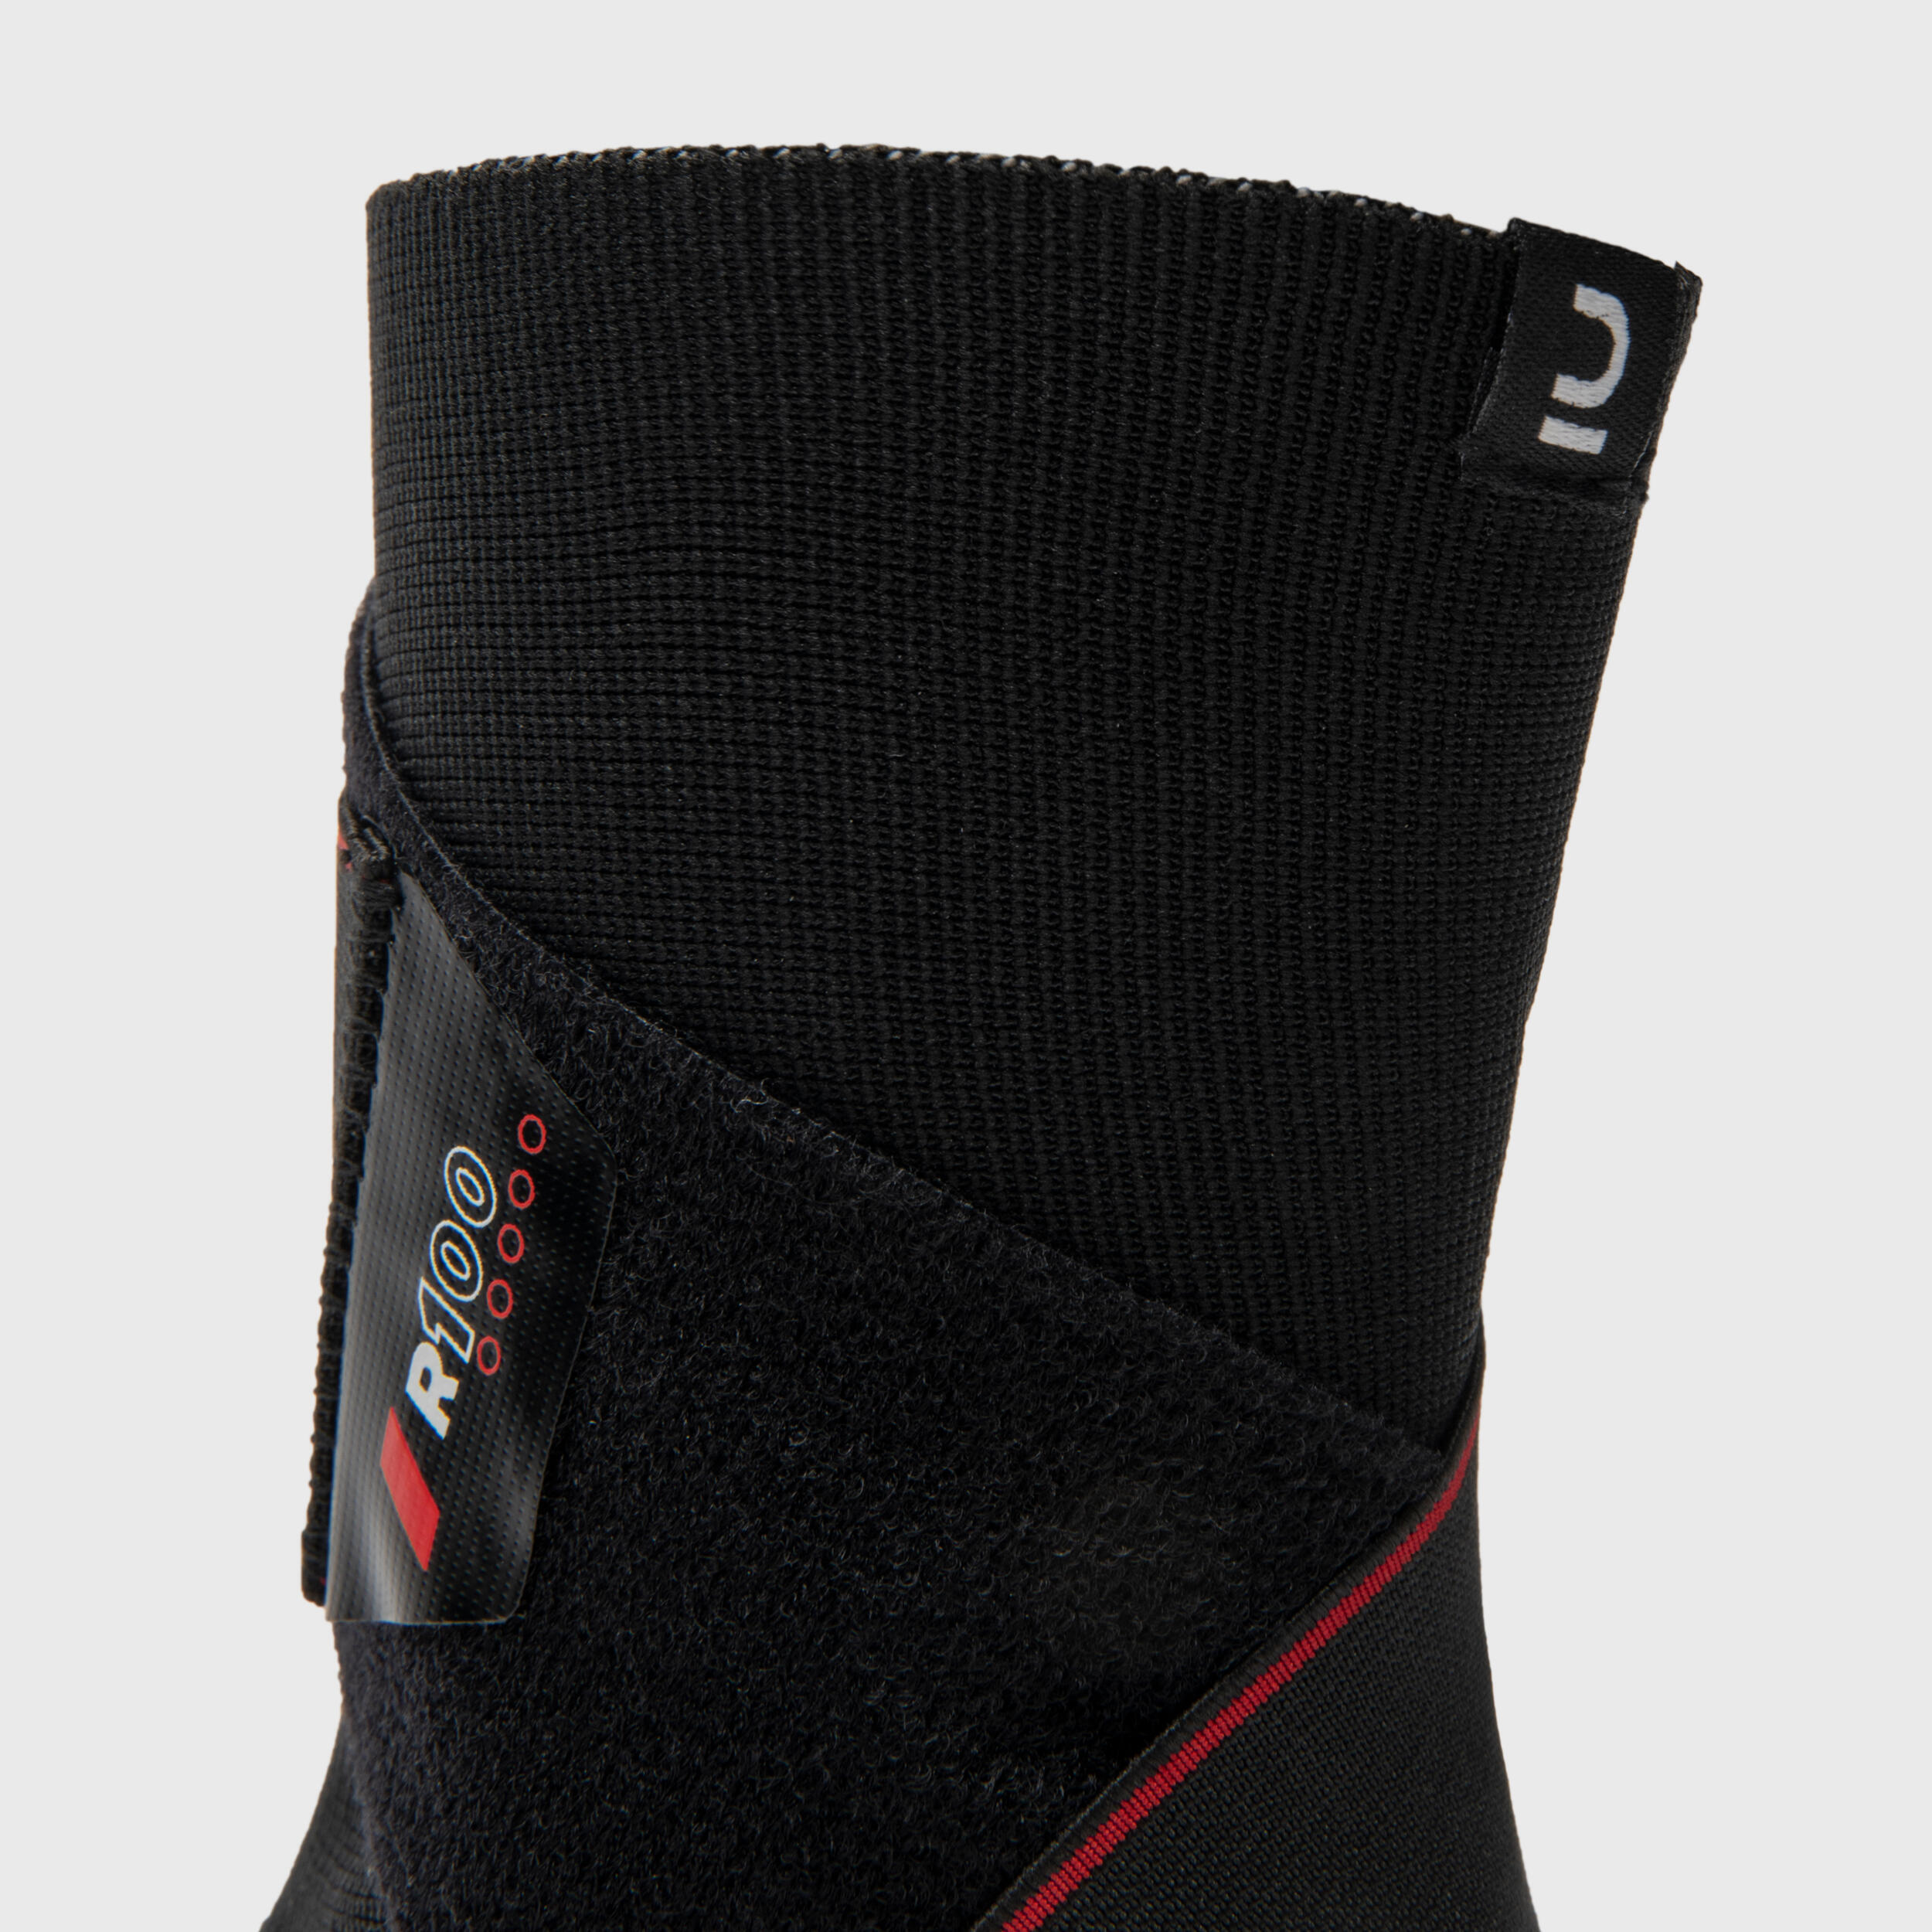 Adult Left/Right Ankle Ligament Support R100 - Black 8/8